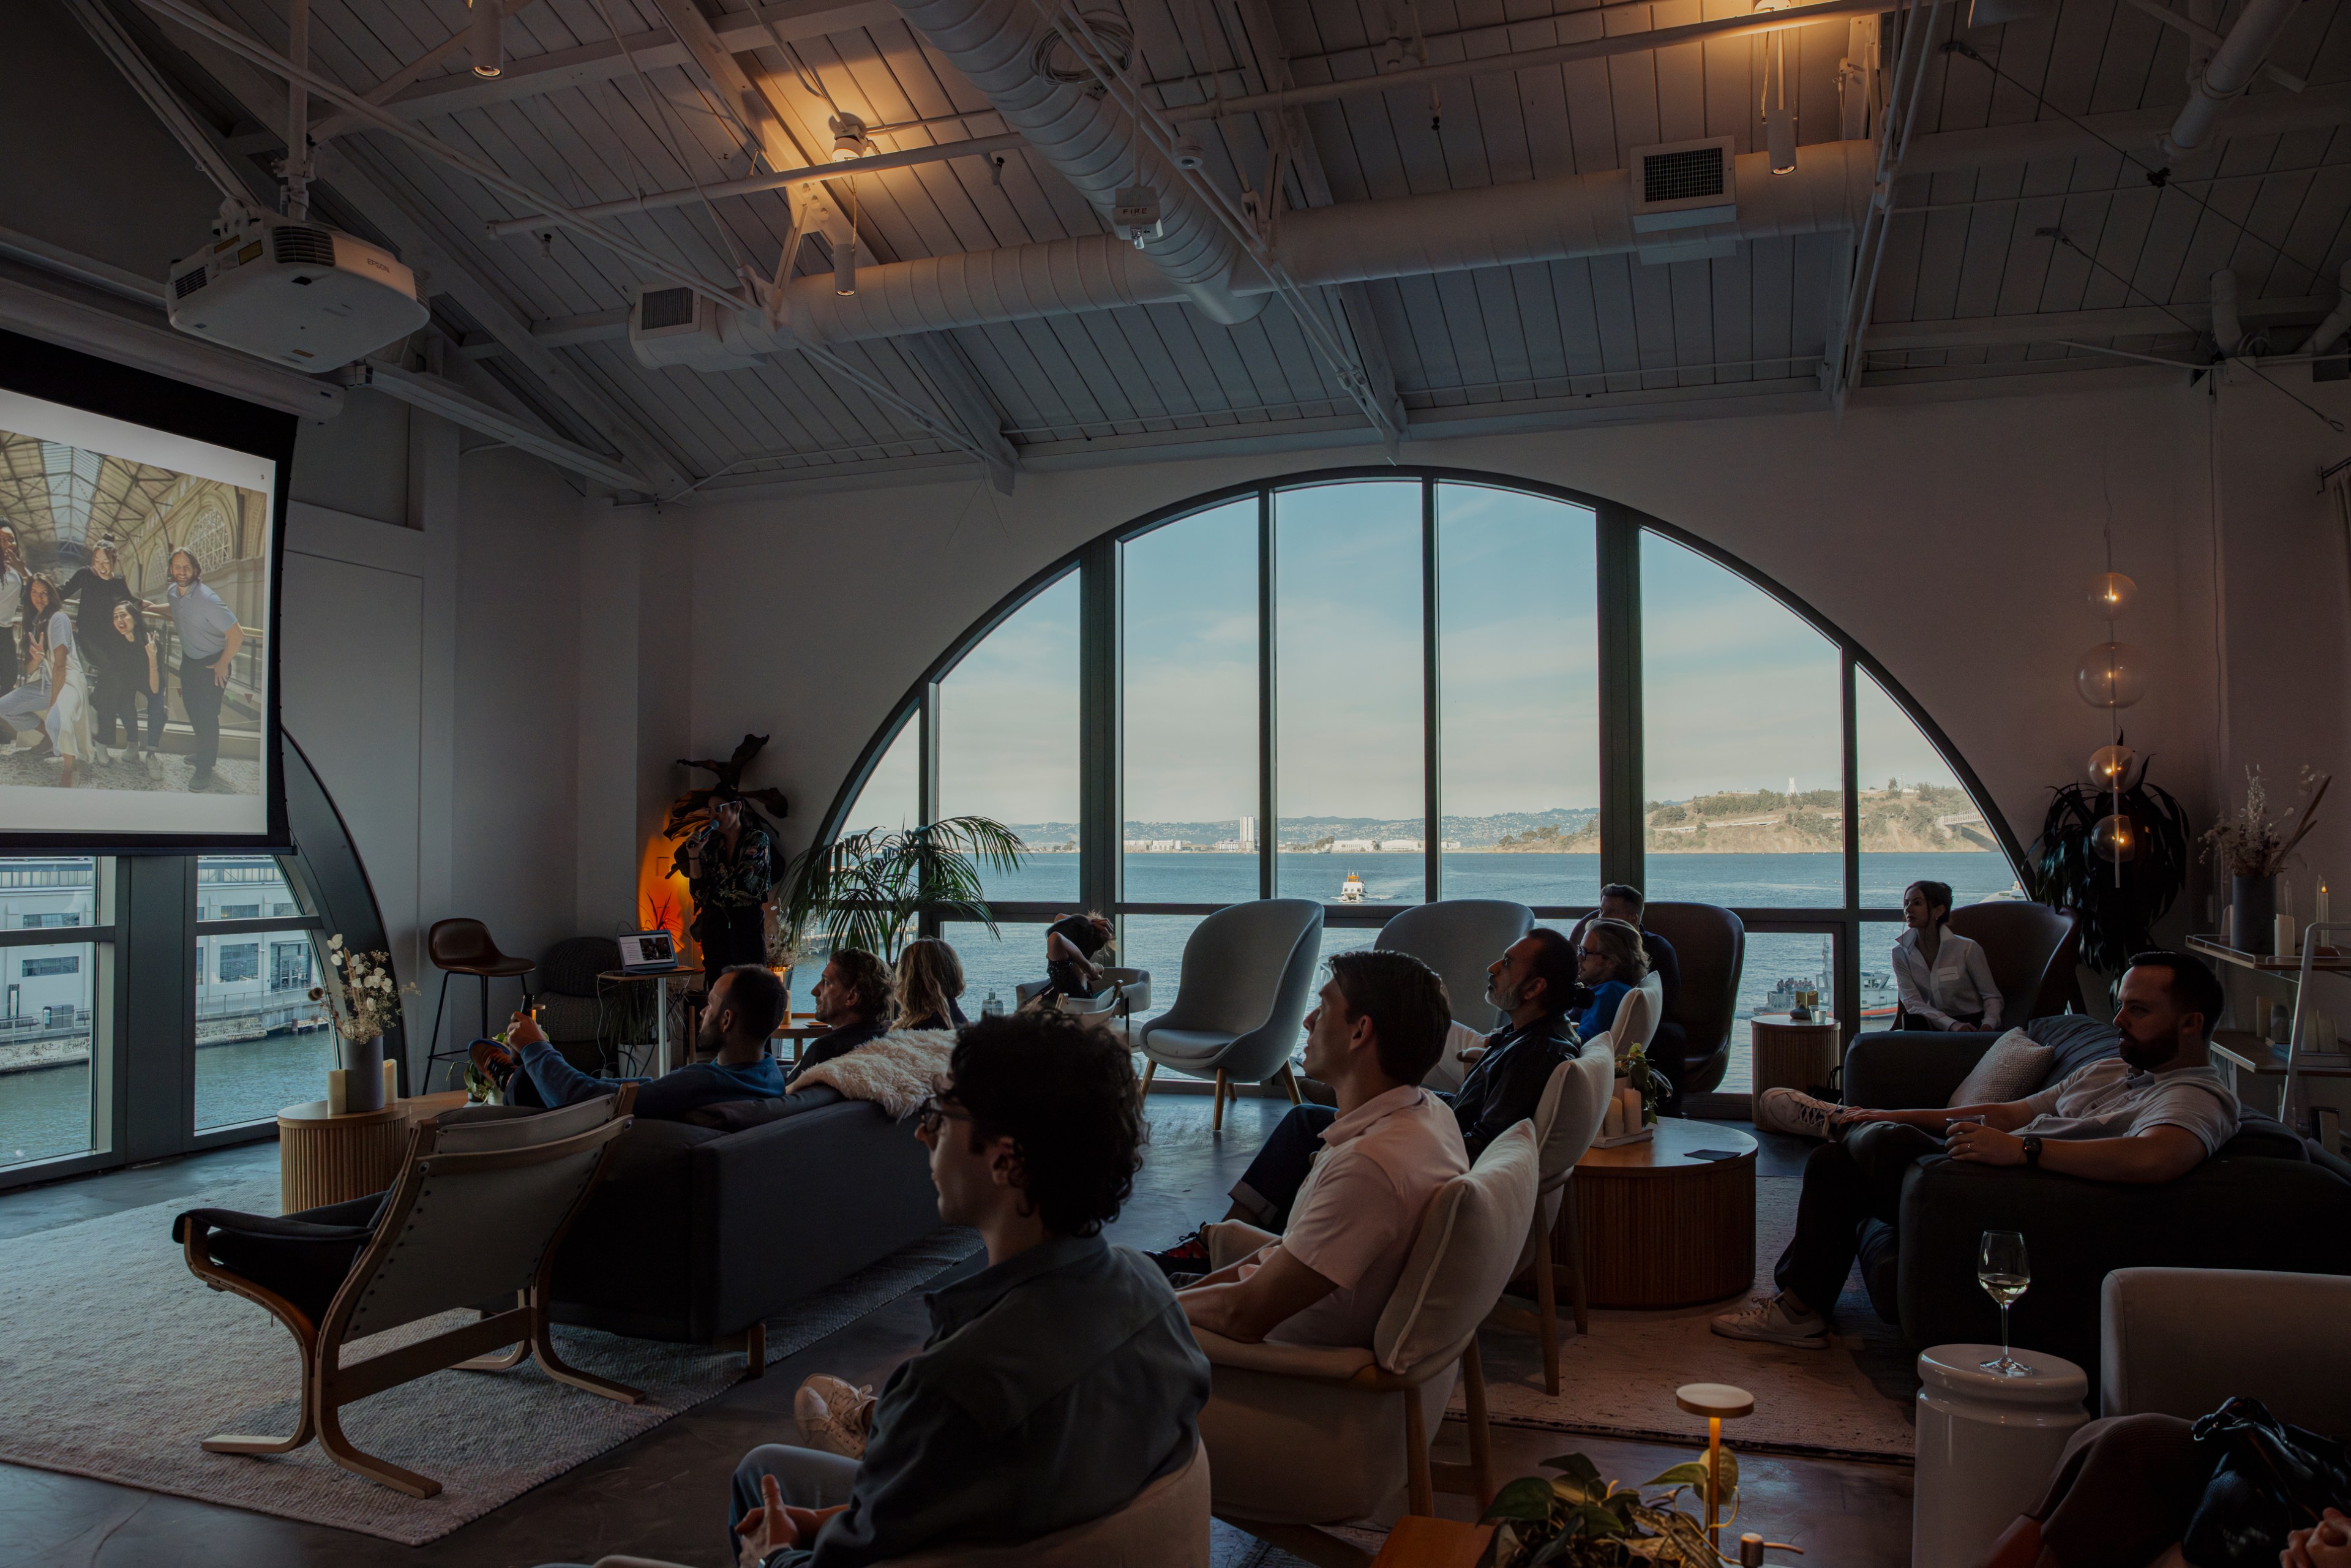 People are seated in a spacious room with large, arched windows overlooking a body of water. They are watching a presentation on a projected screen.